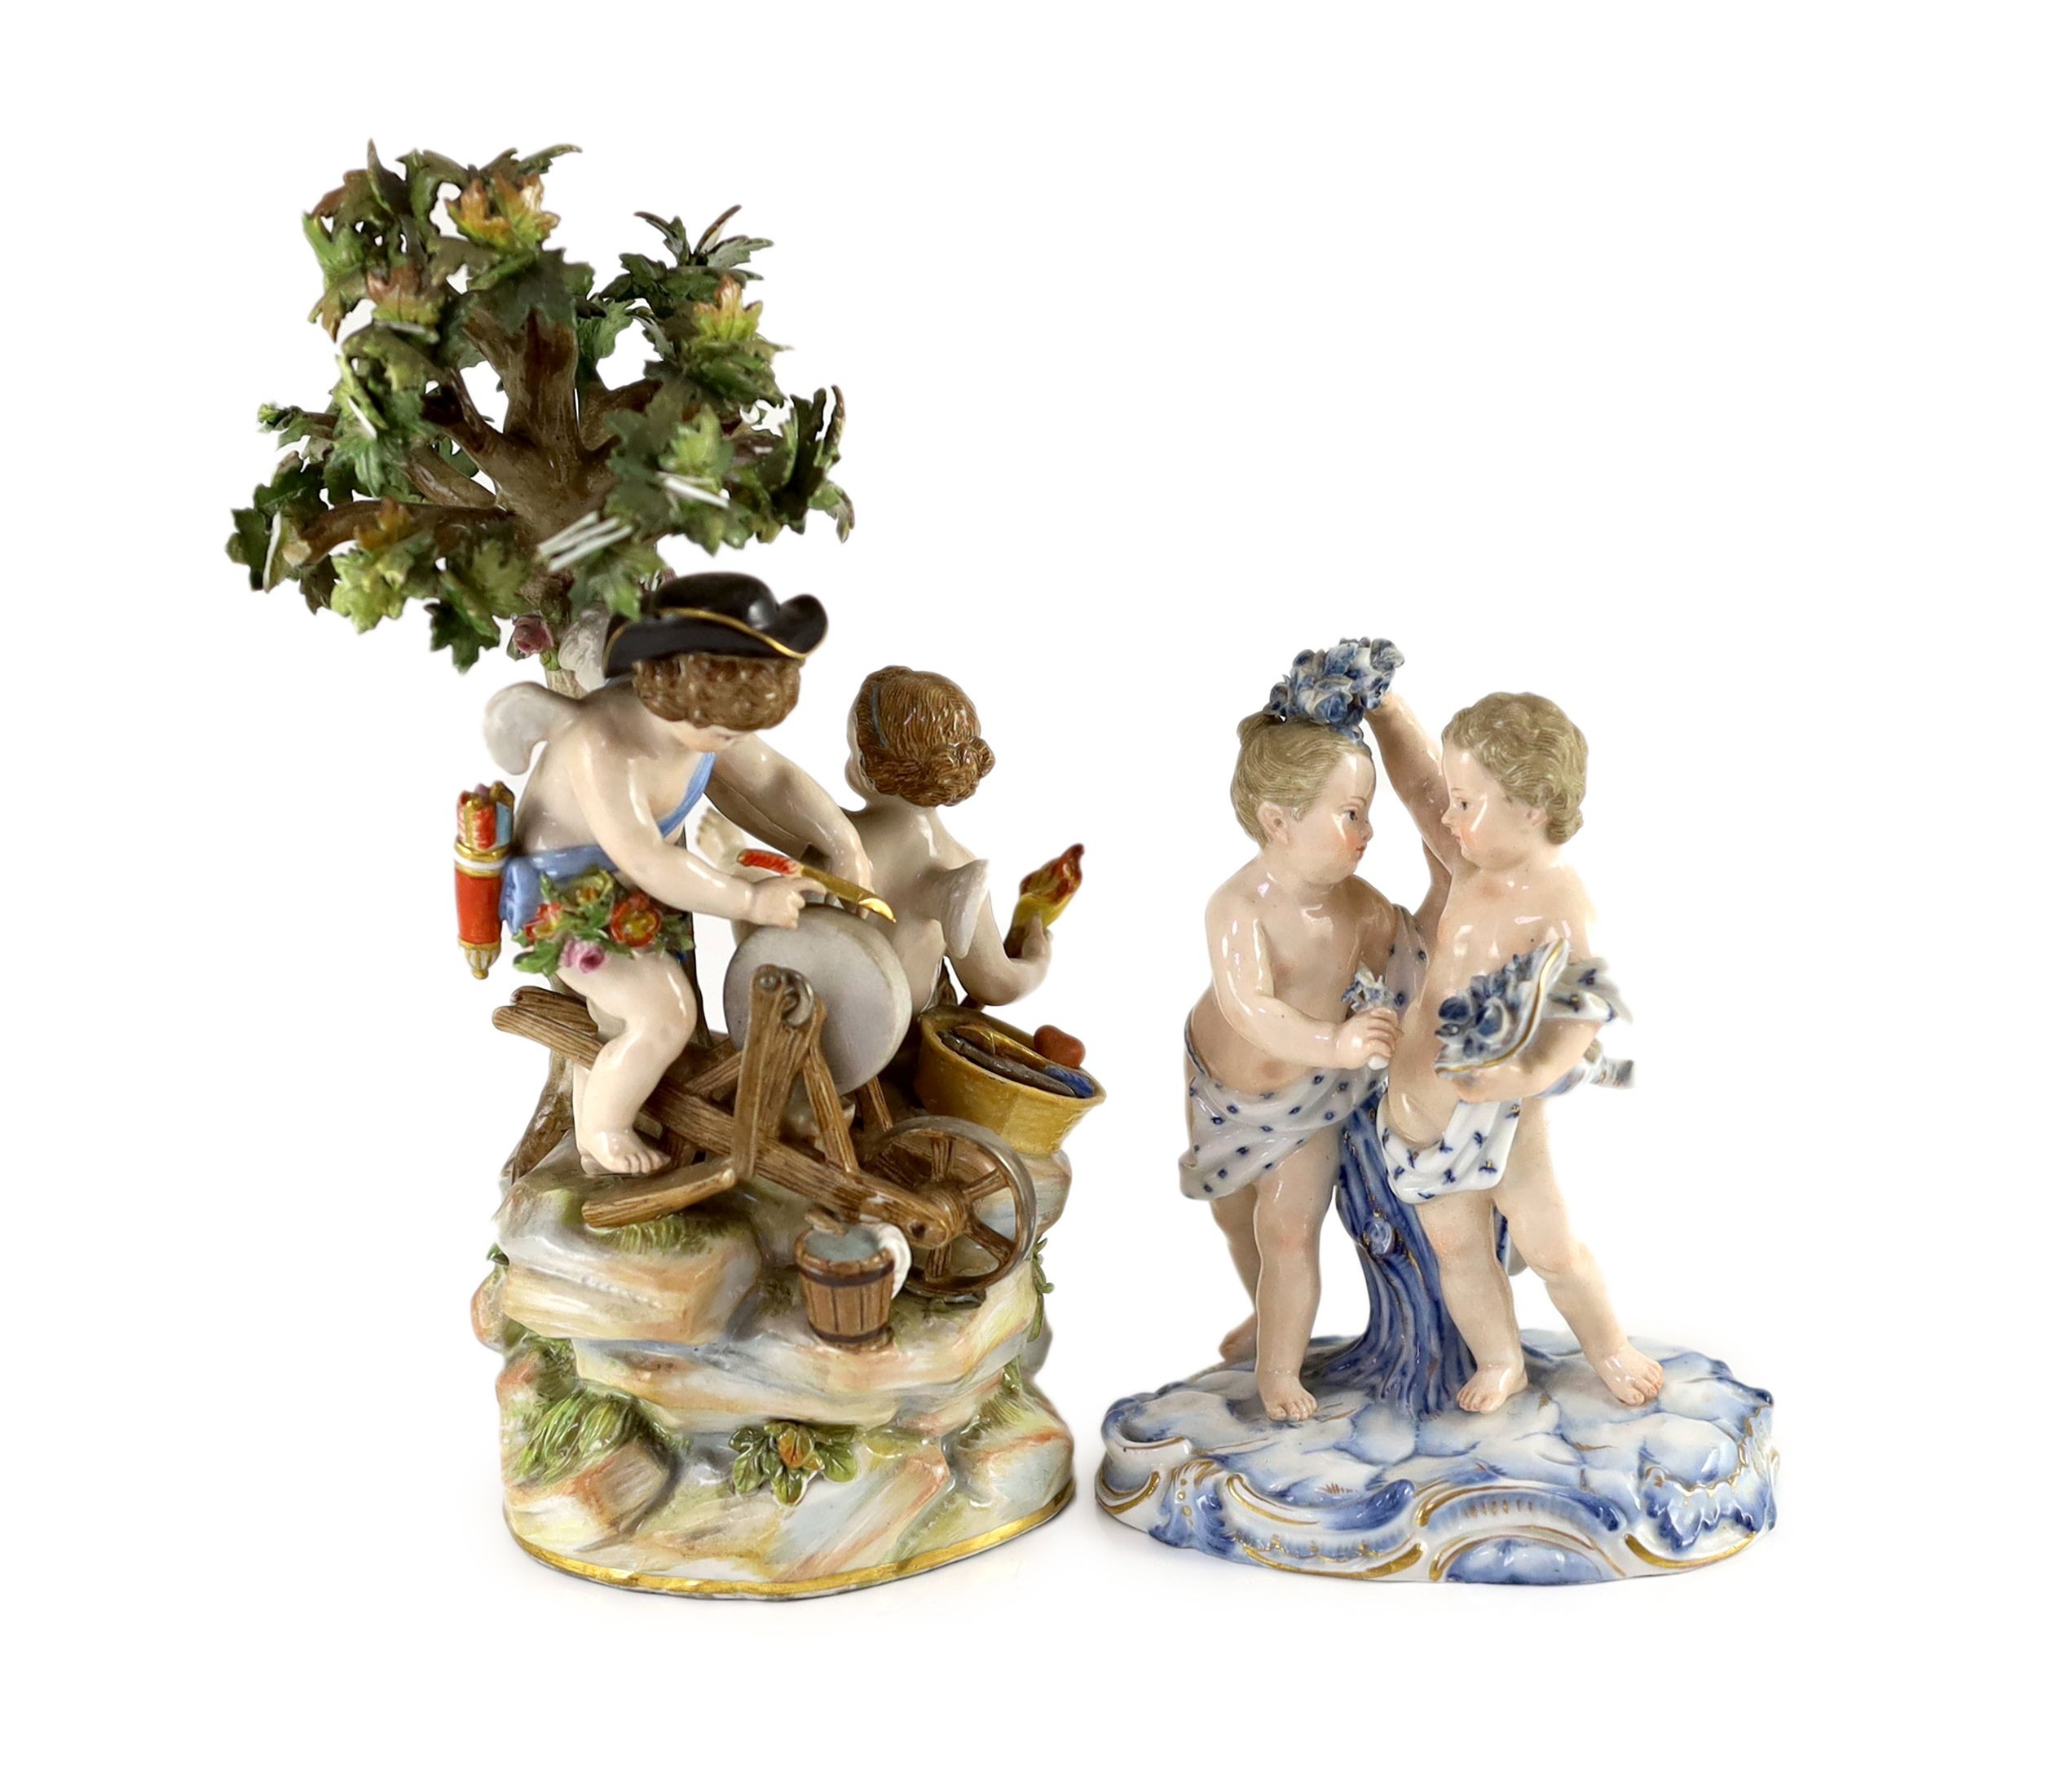 A Meissen group of Cupid forging arrows and a similar group of two cherubs, late 19th century, 20 cm and 13cm high